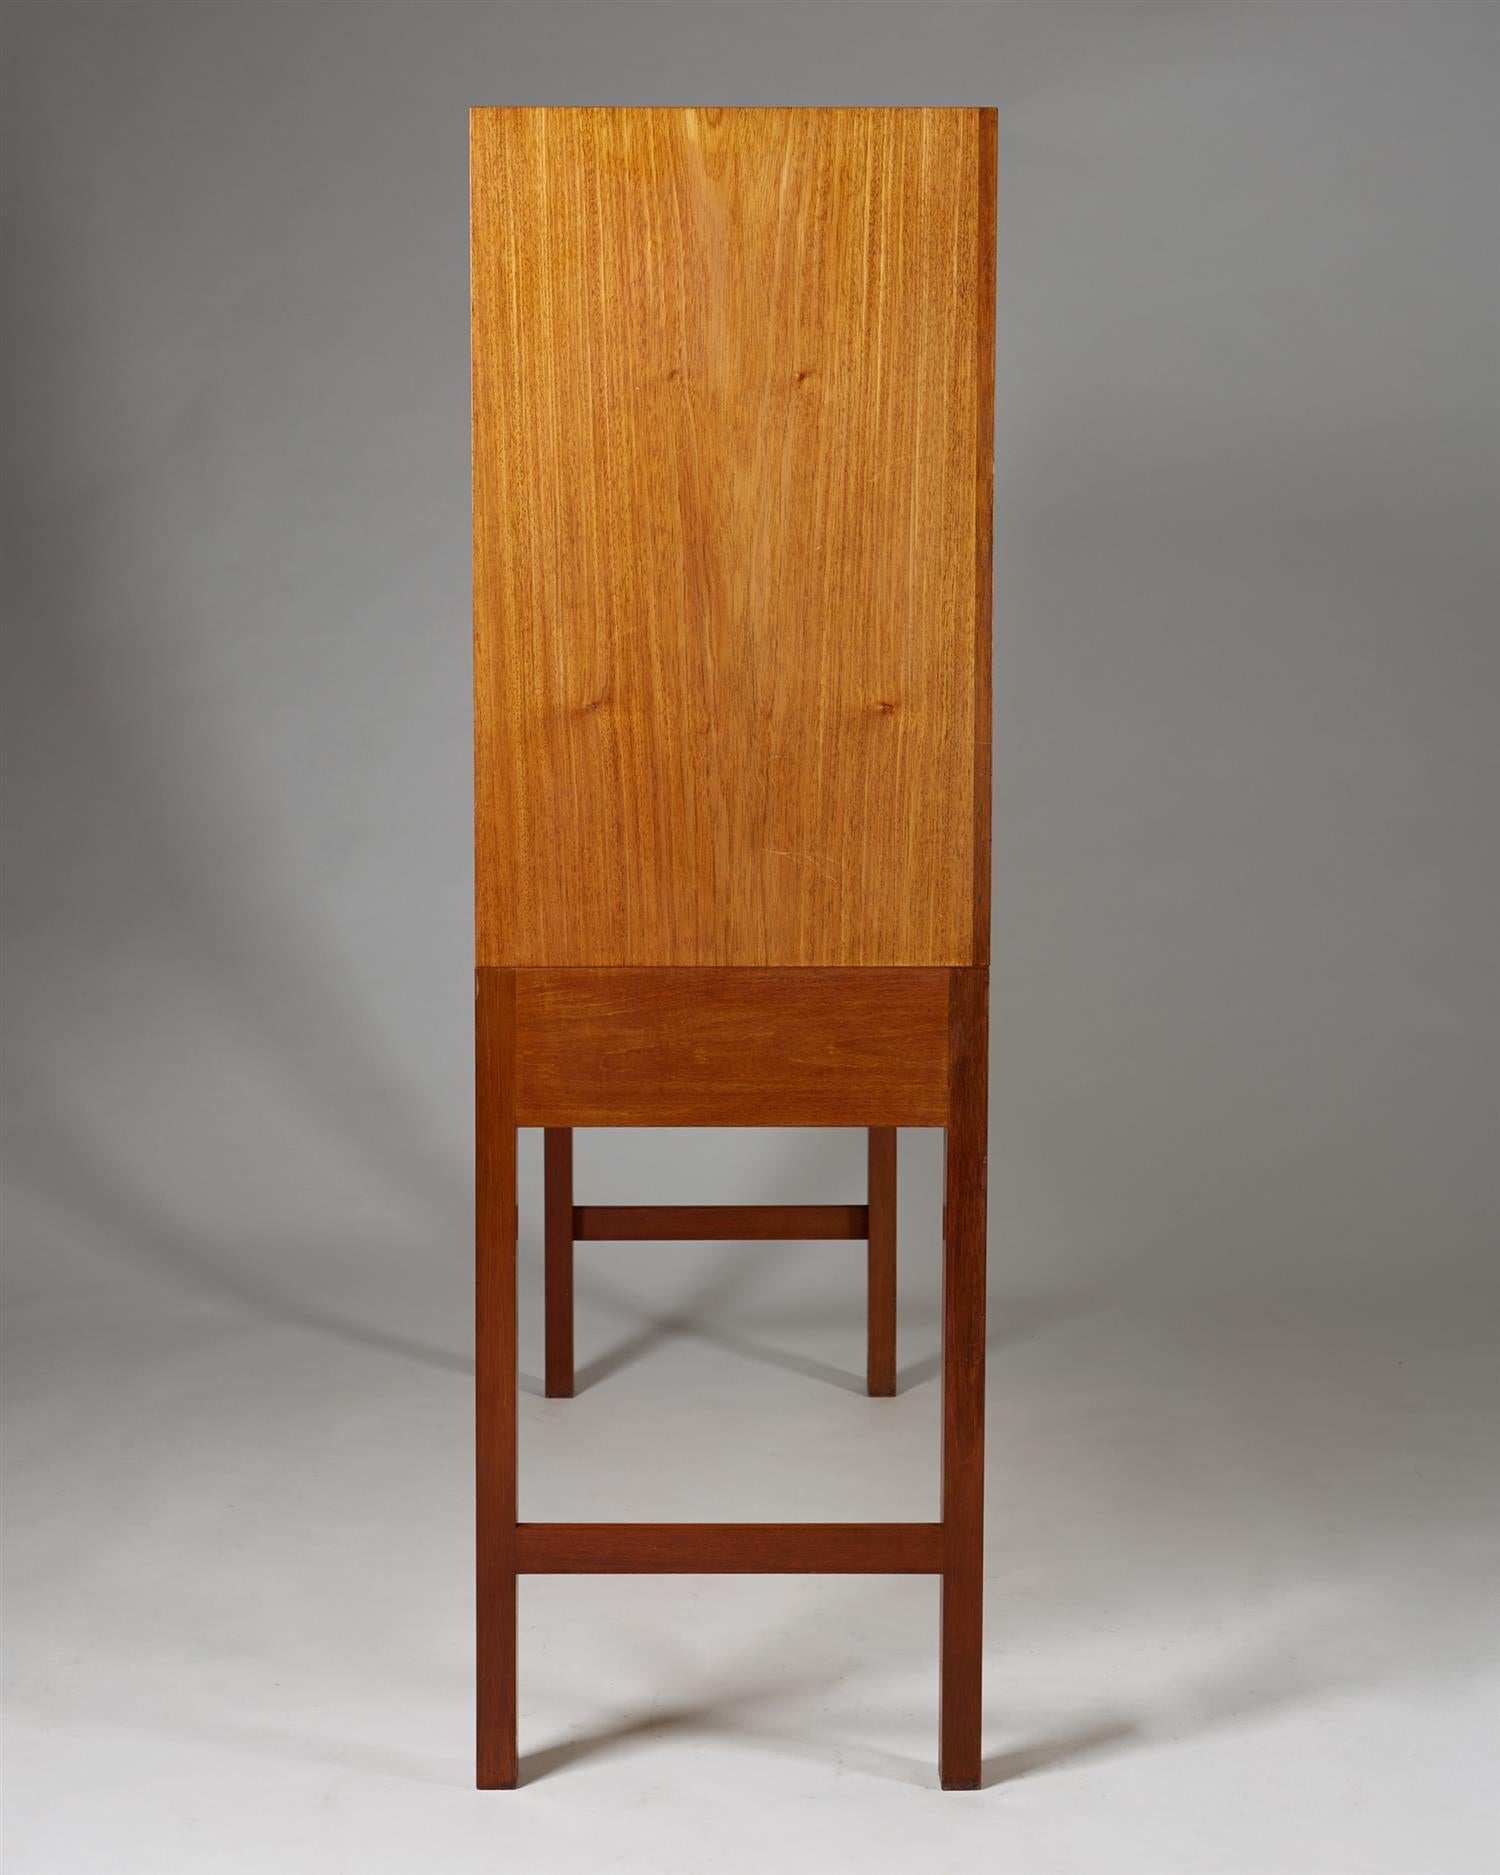 Mid-20th Century Cabinet, Designed by Ole Wanscher for A. J. Iversen, Denmark, 1947